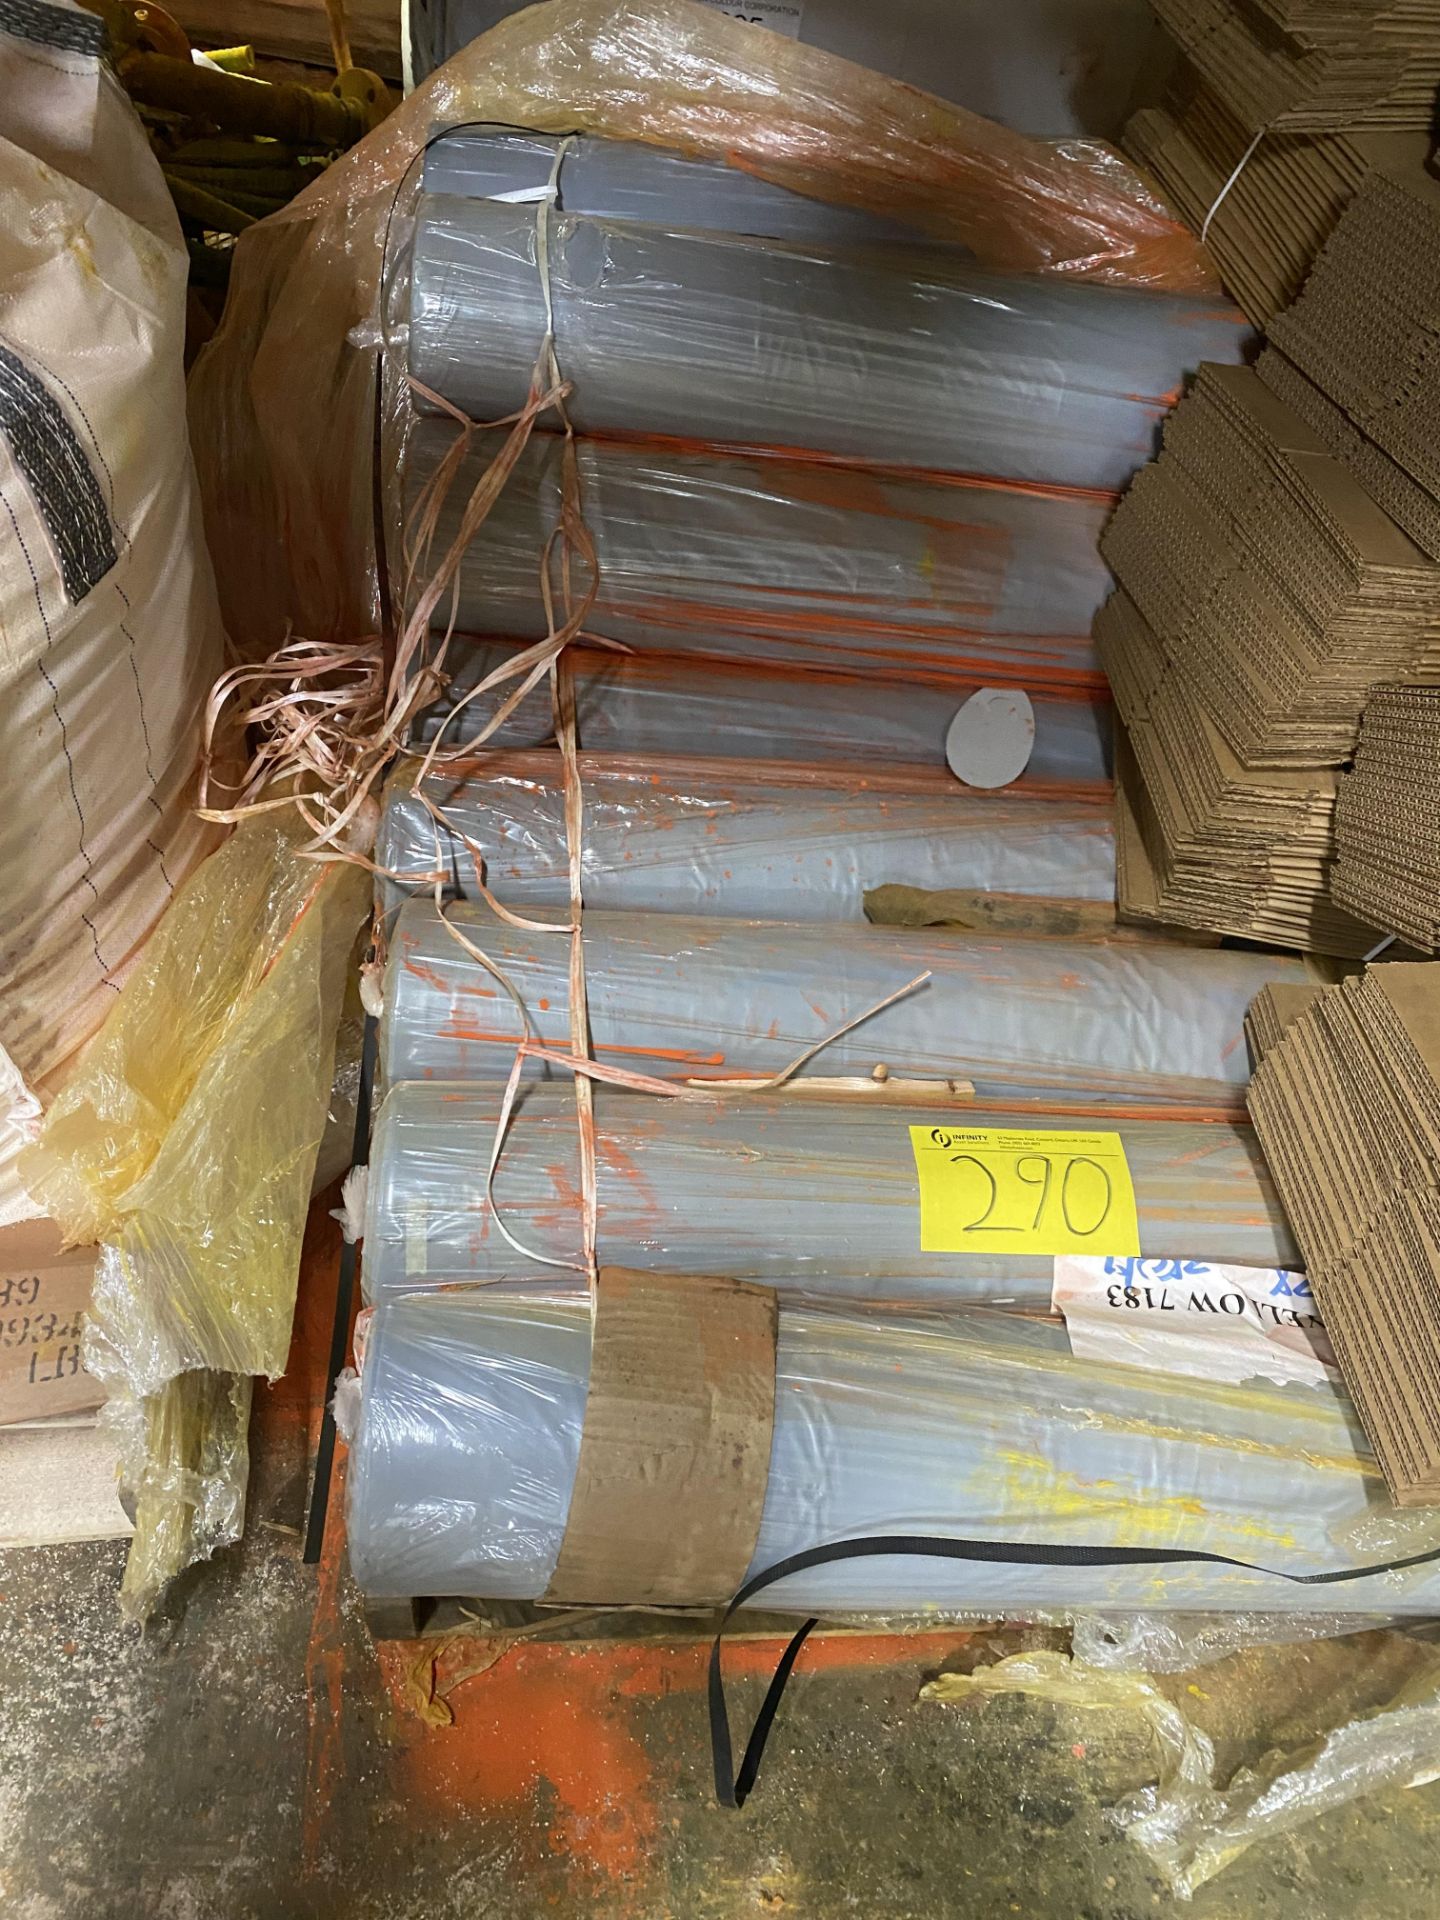 BUBBLE WRAP ROLL AND PALLET OF PLASTIC BAG ROLLS / CARTONS - Image 3 of 5